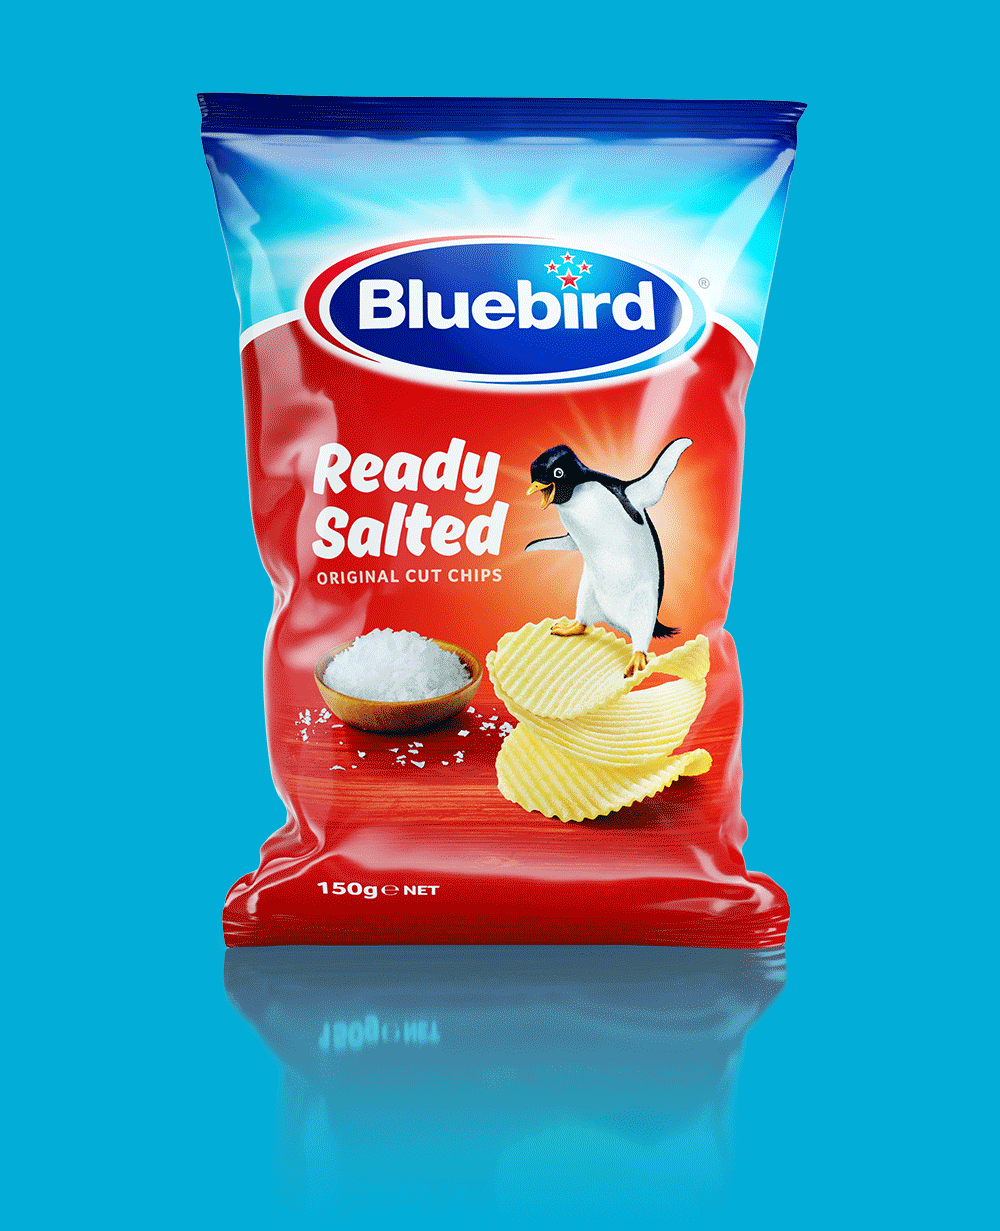 BlueBird penguin 3D feathers 3D Character Packaging Advertising  iconic New Zealand